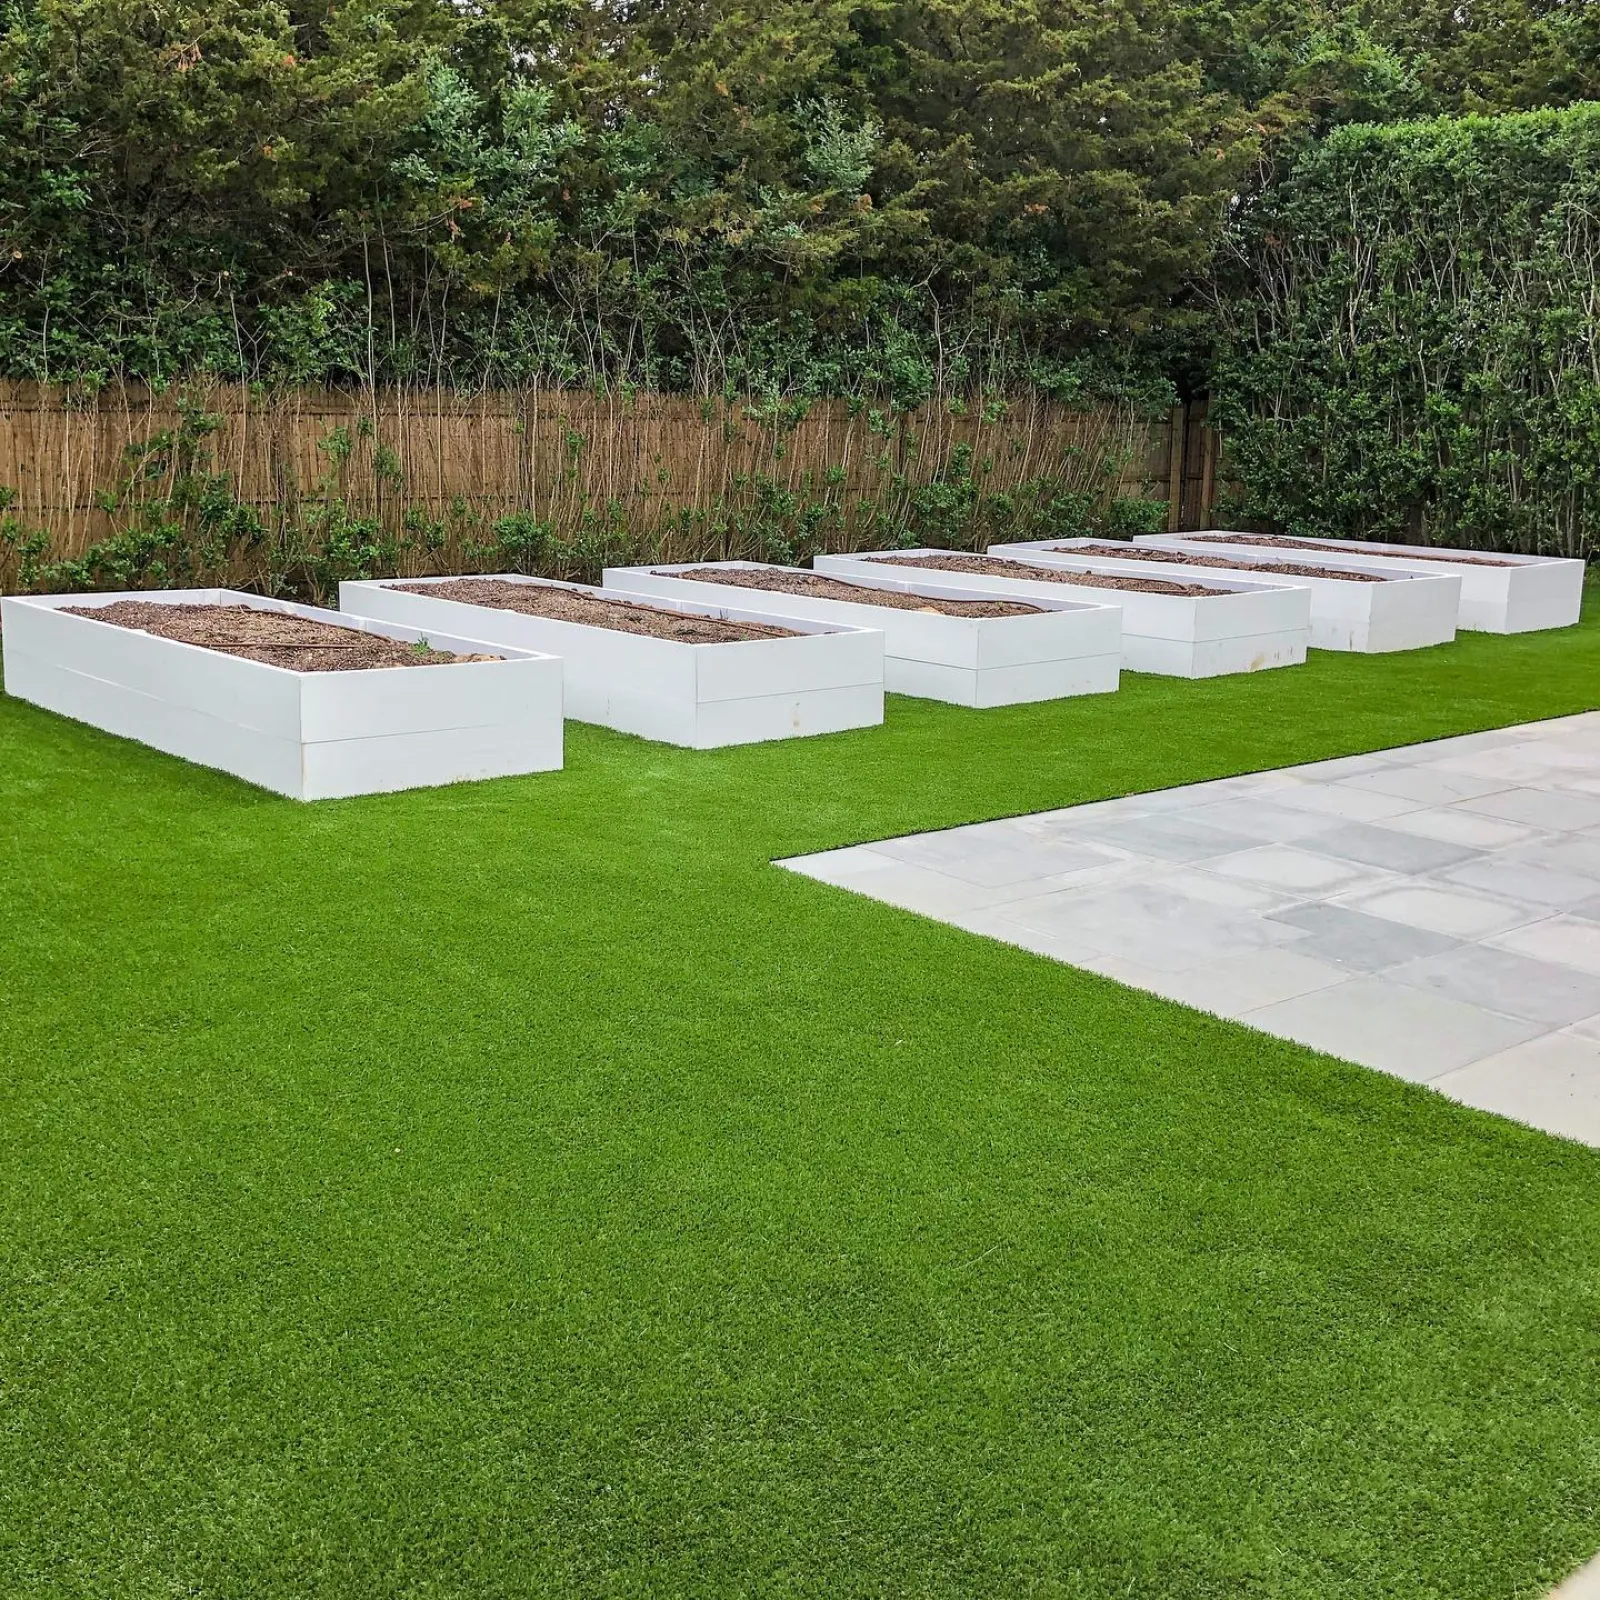 a large green lawn with white boxes